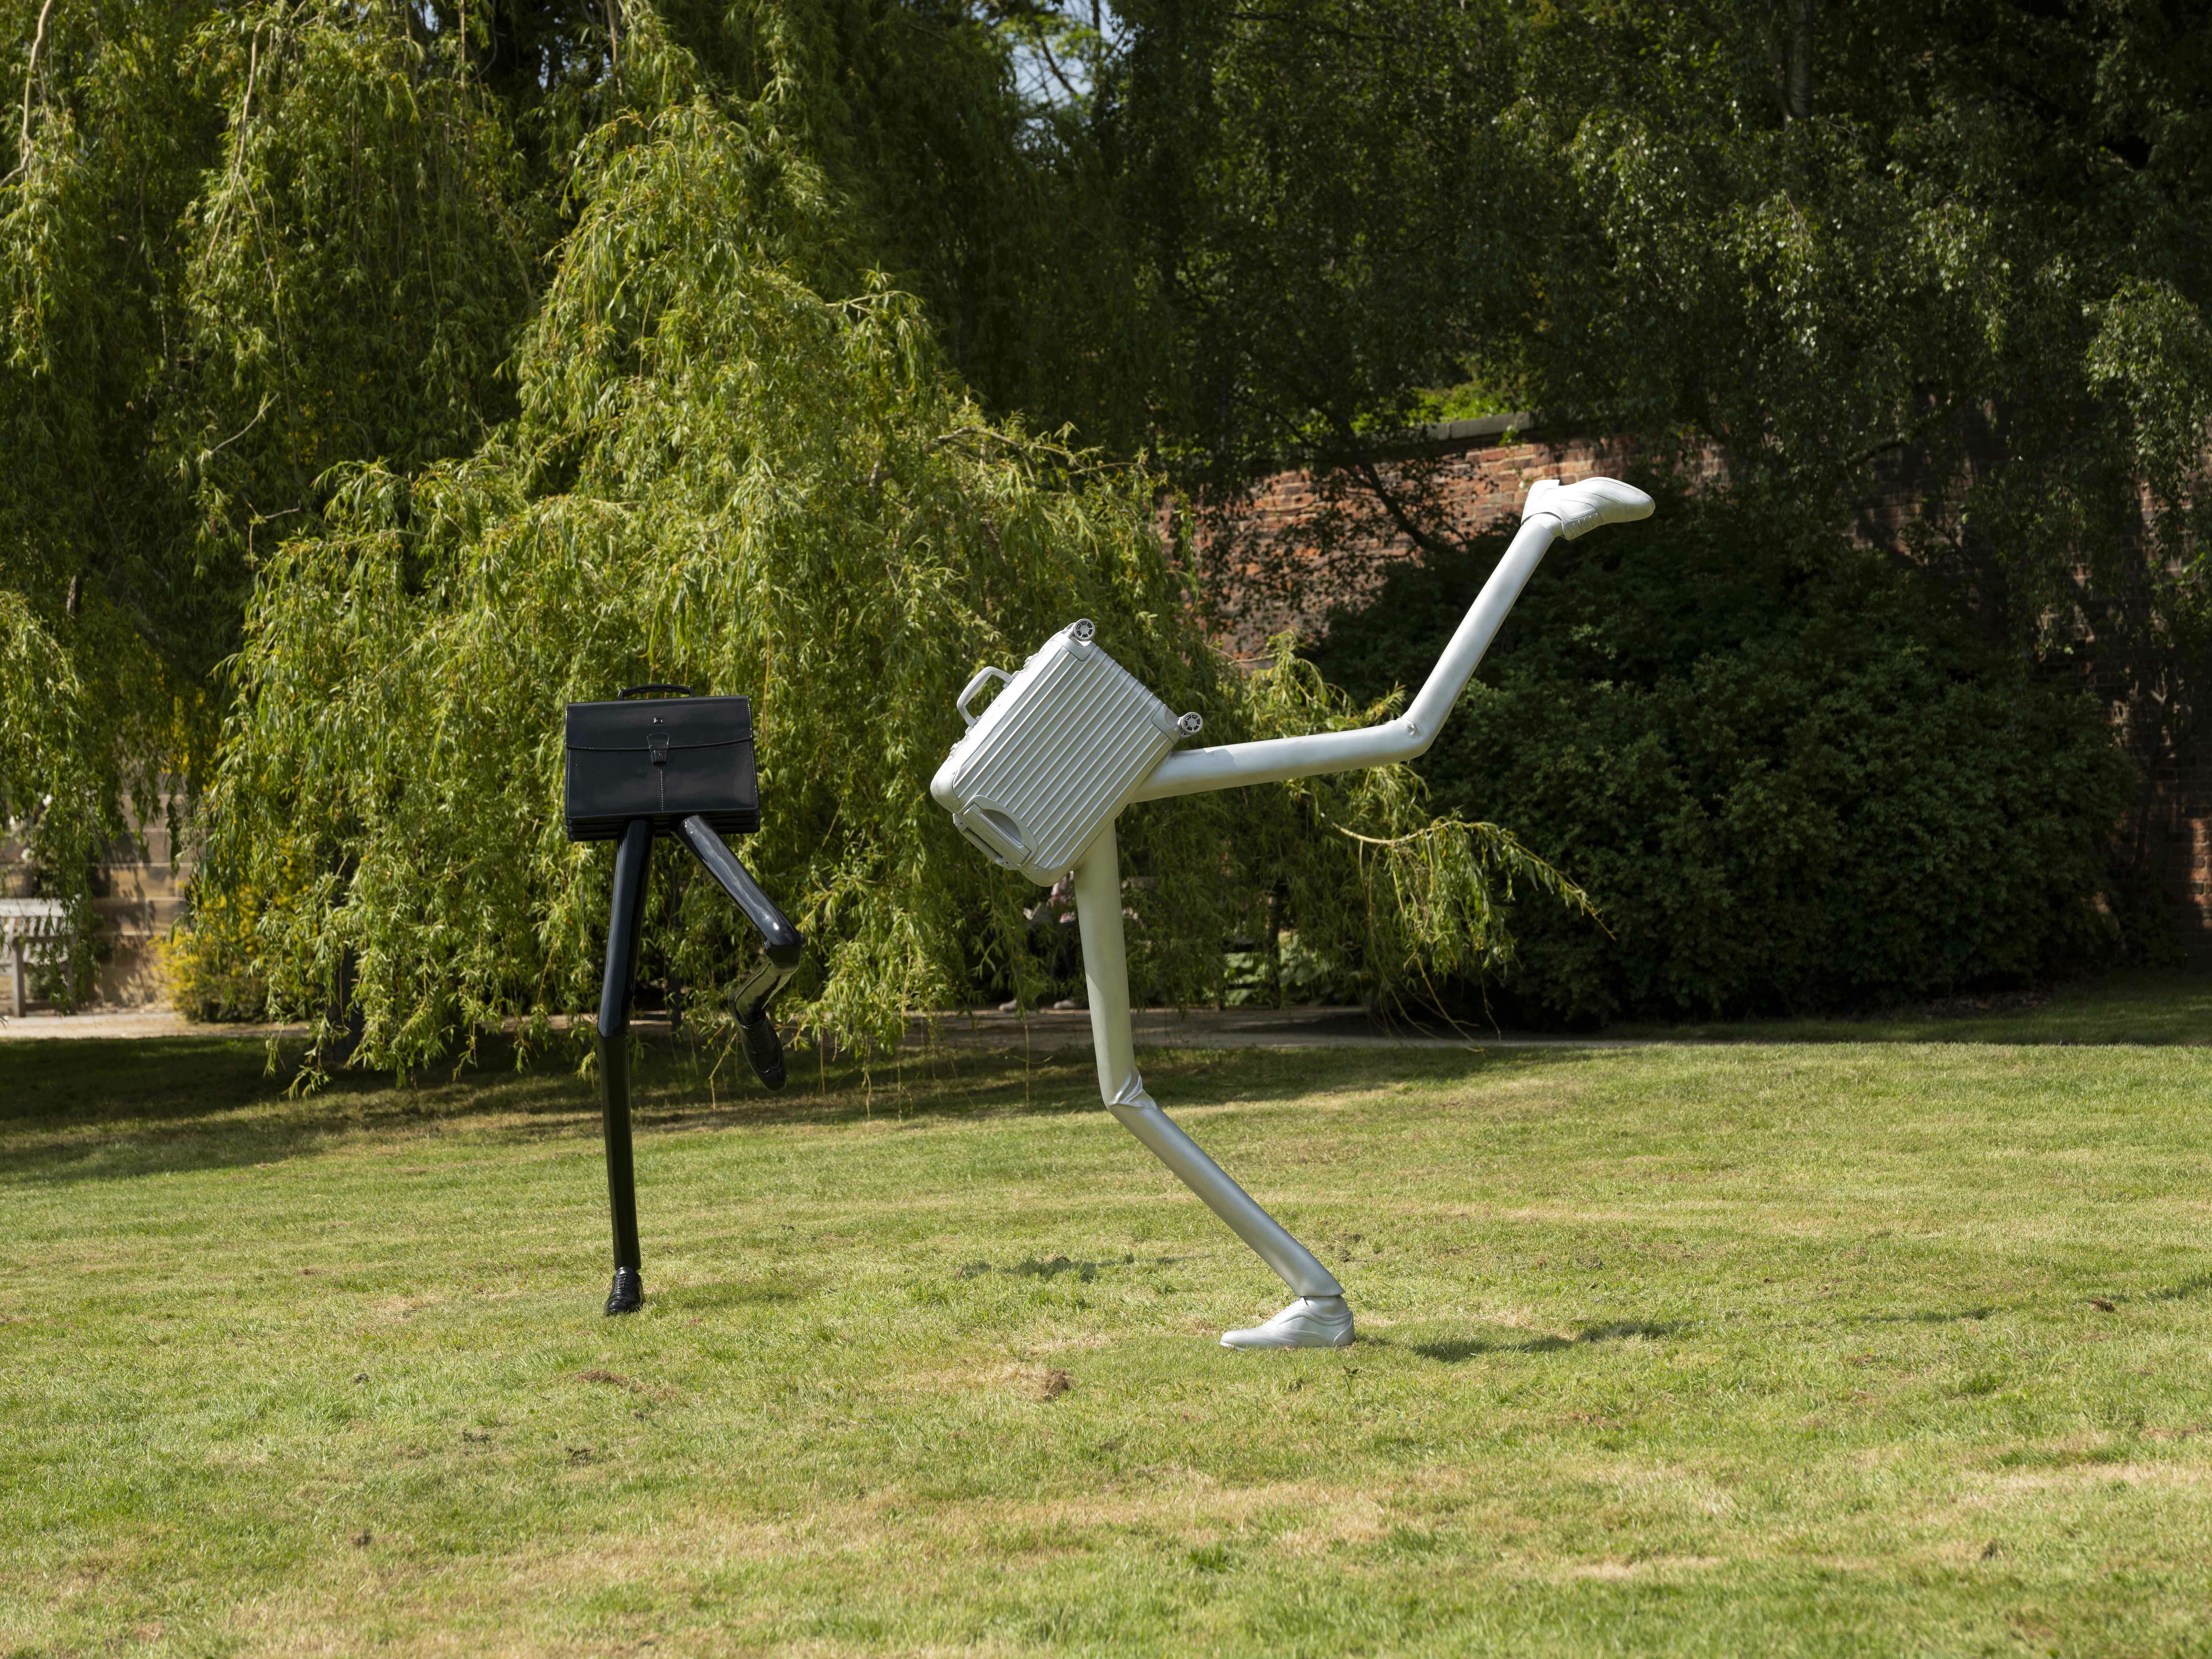 A silver suitcase sculpture and black briefcase sculpture both with legs on a lawn.